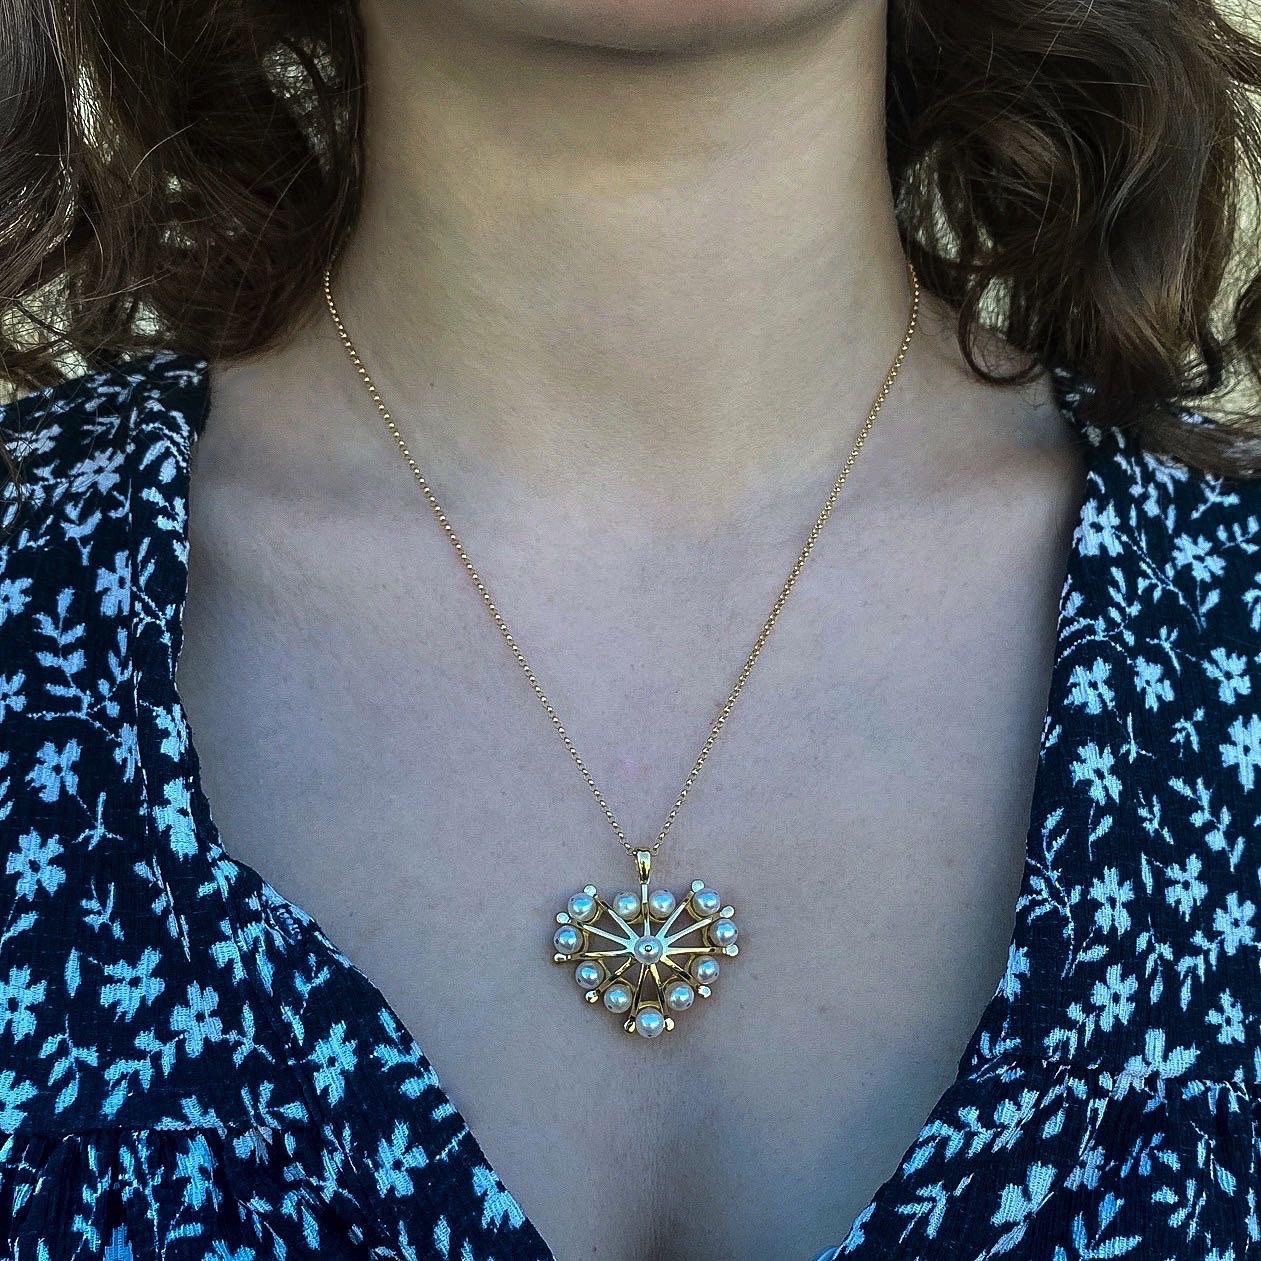 The ‘Pearl heart’, pendant is crafted in 18K gold hallmarked in Cyprus. This impressive, statement pendant comes in a highly polished finish and features 12 white Akoyia Pearls. Model wears it on a 50 cm long chain. Chain is sold separately. The